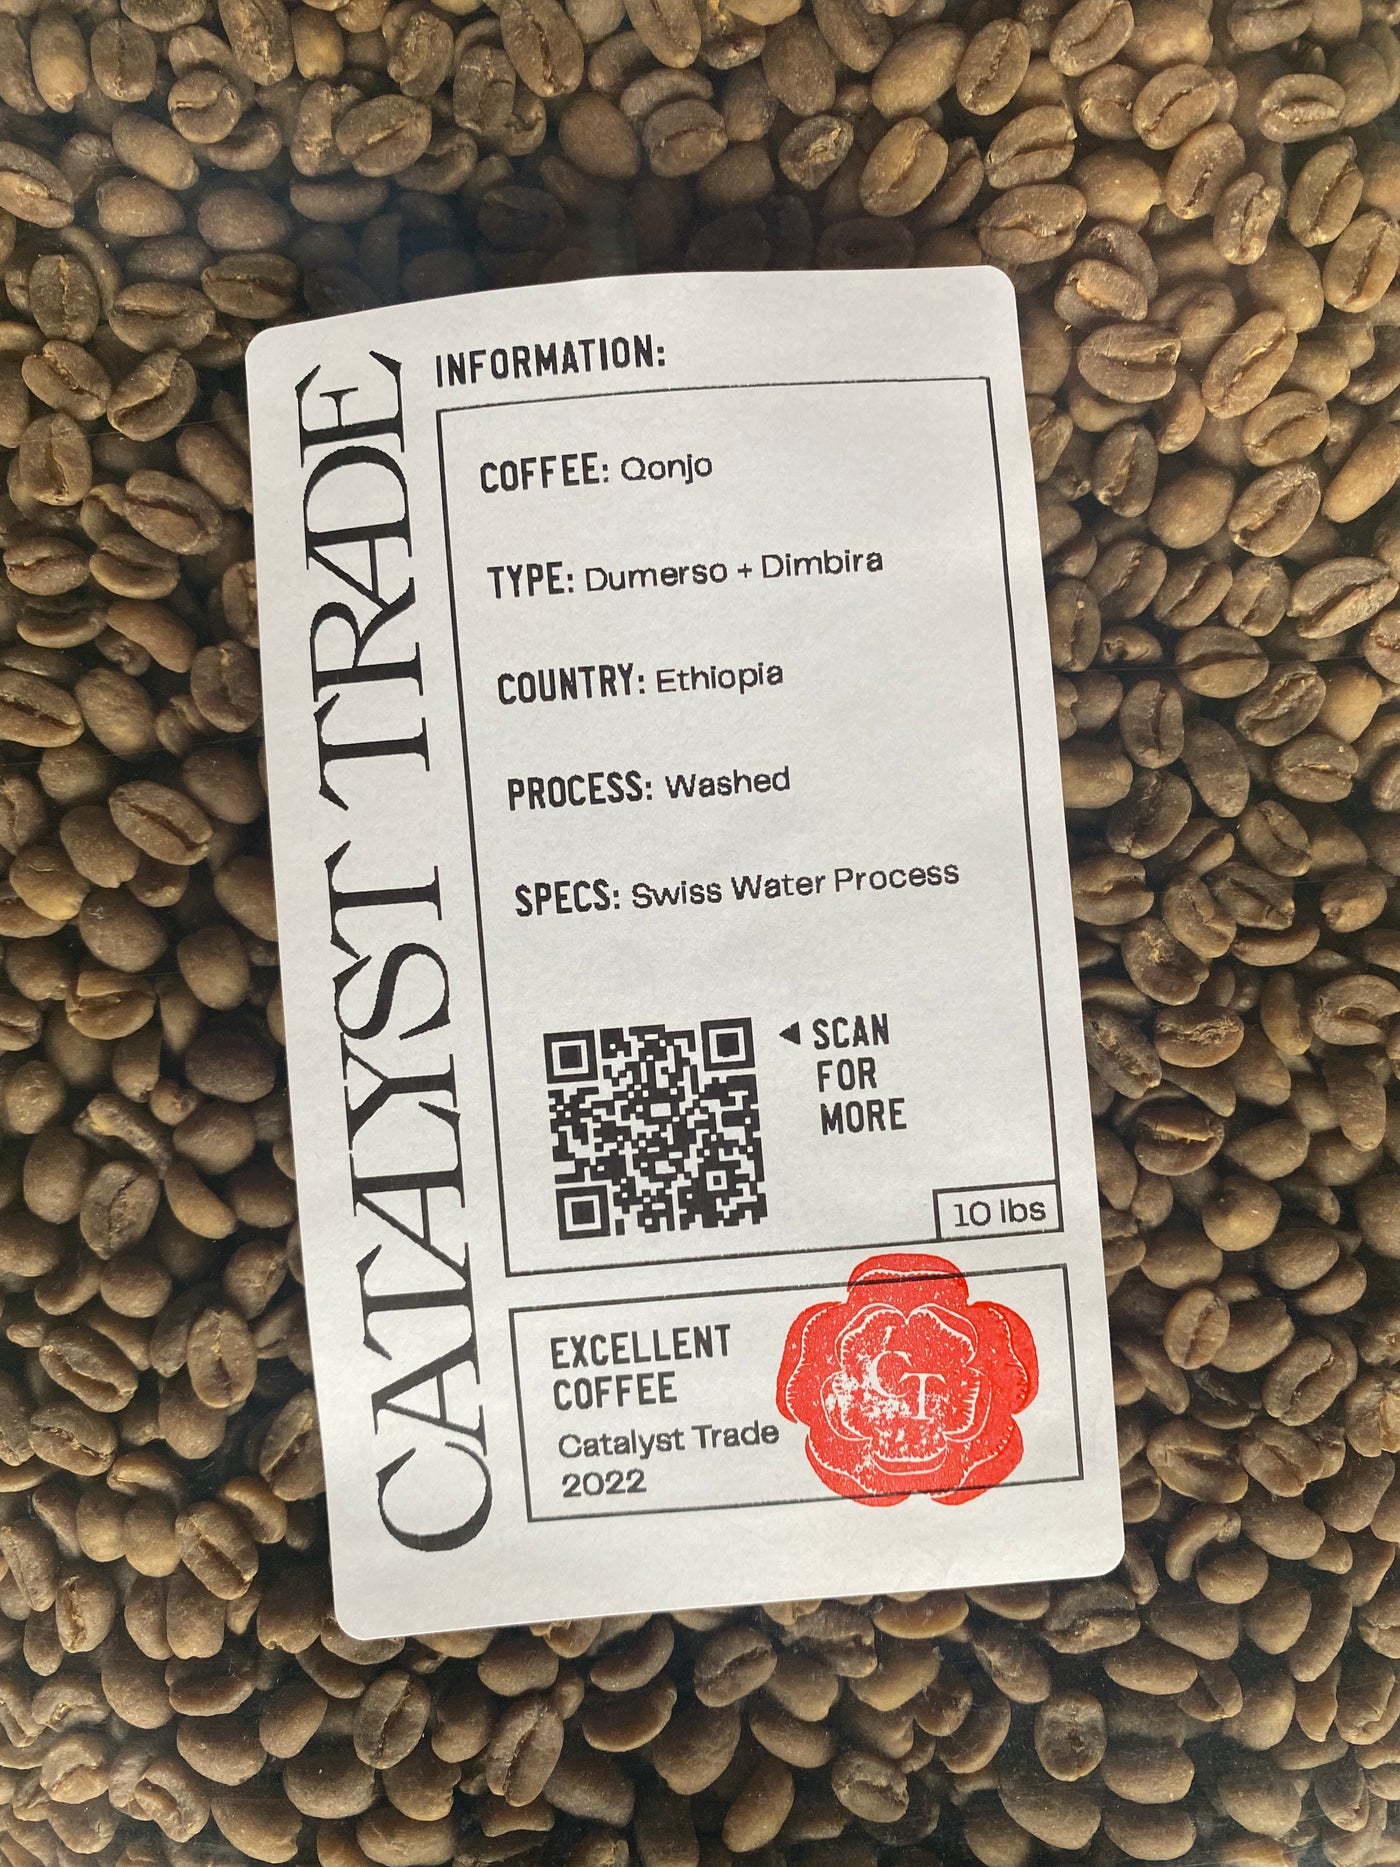 Washed - Ethiopia - Qonjo Decaf - Swiss Water Process